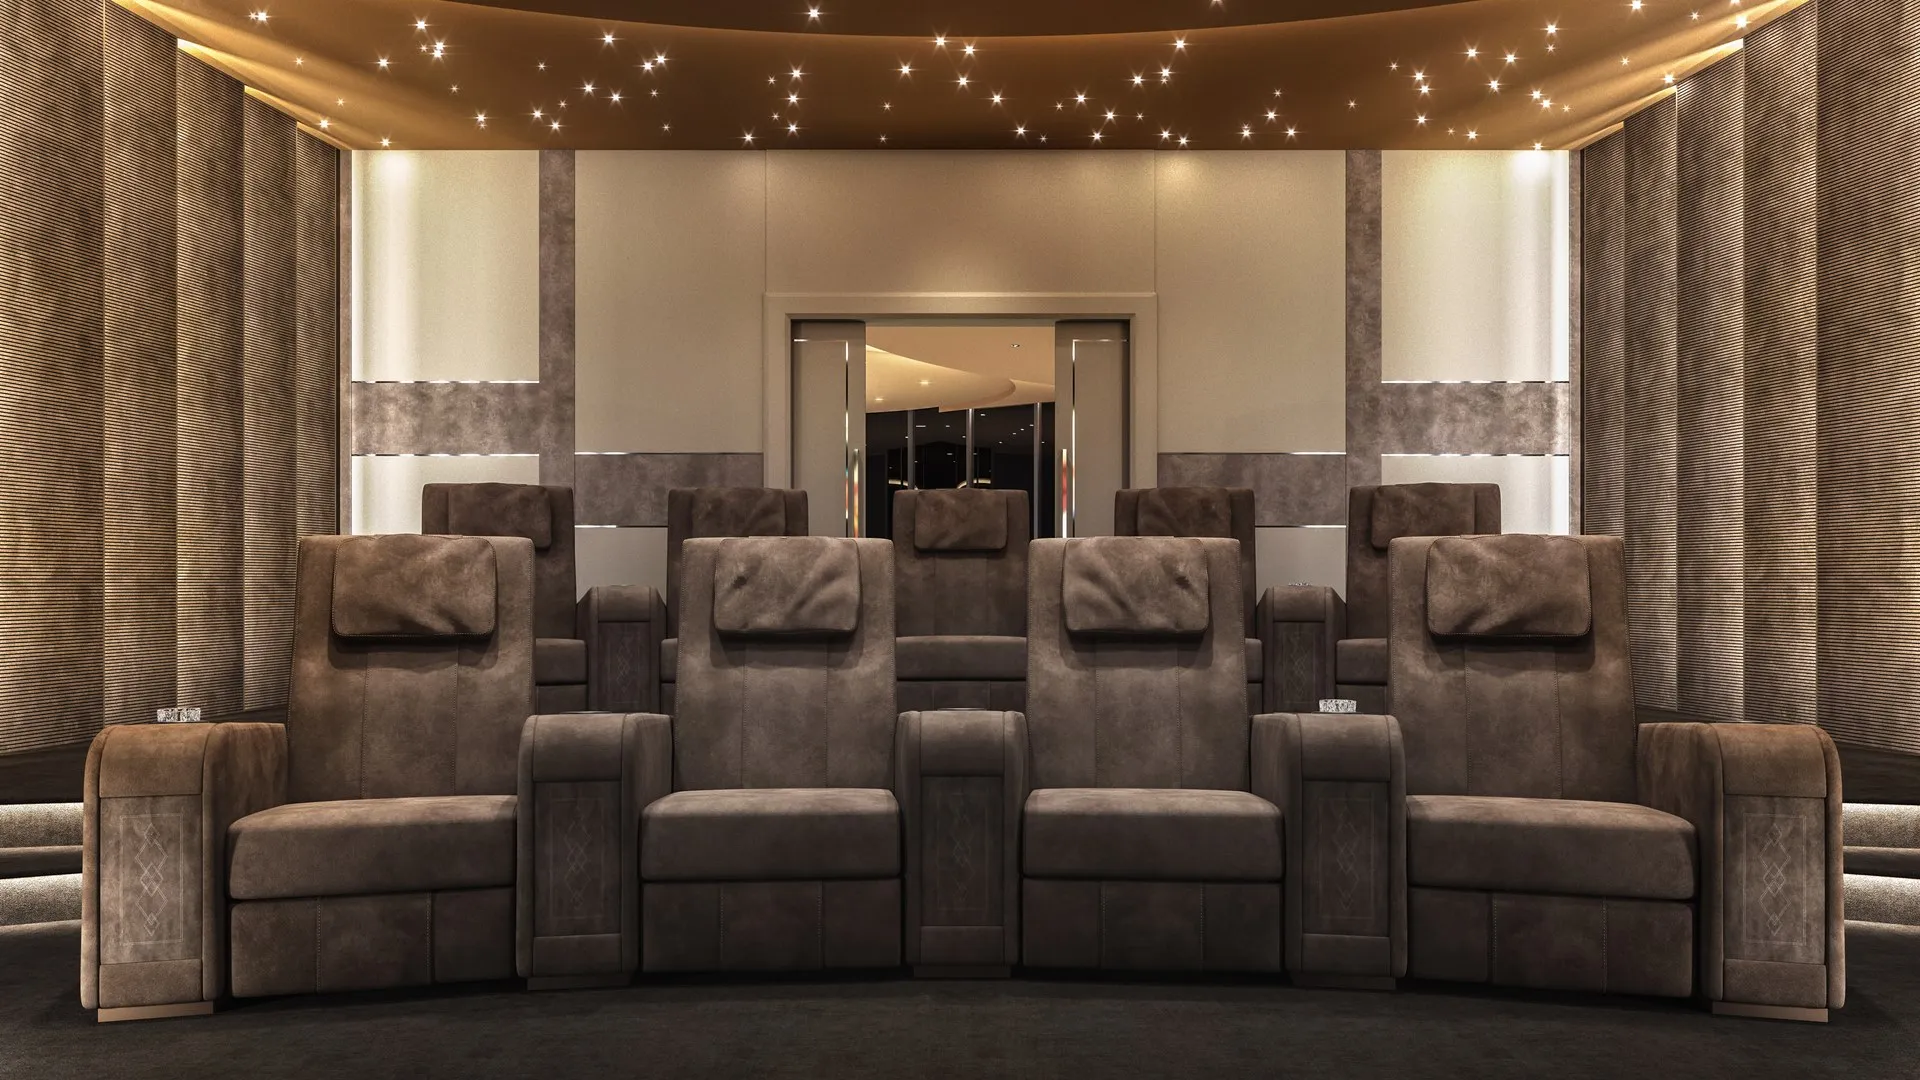 private home cinema with reclining seating